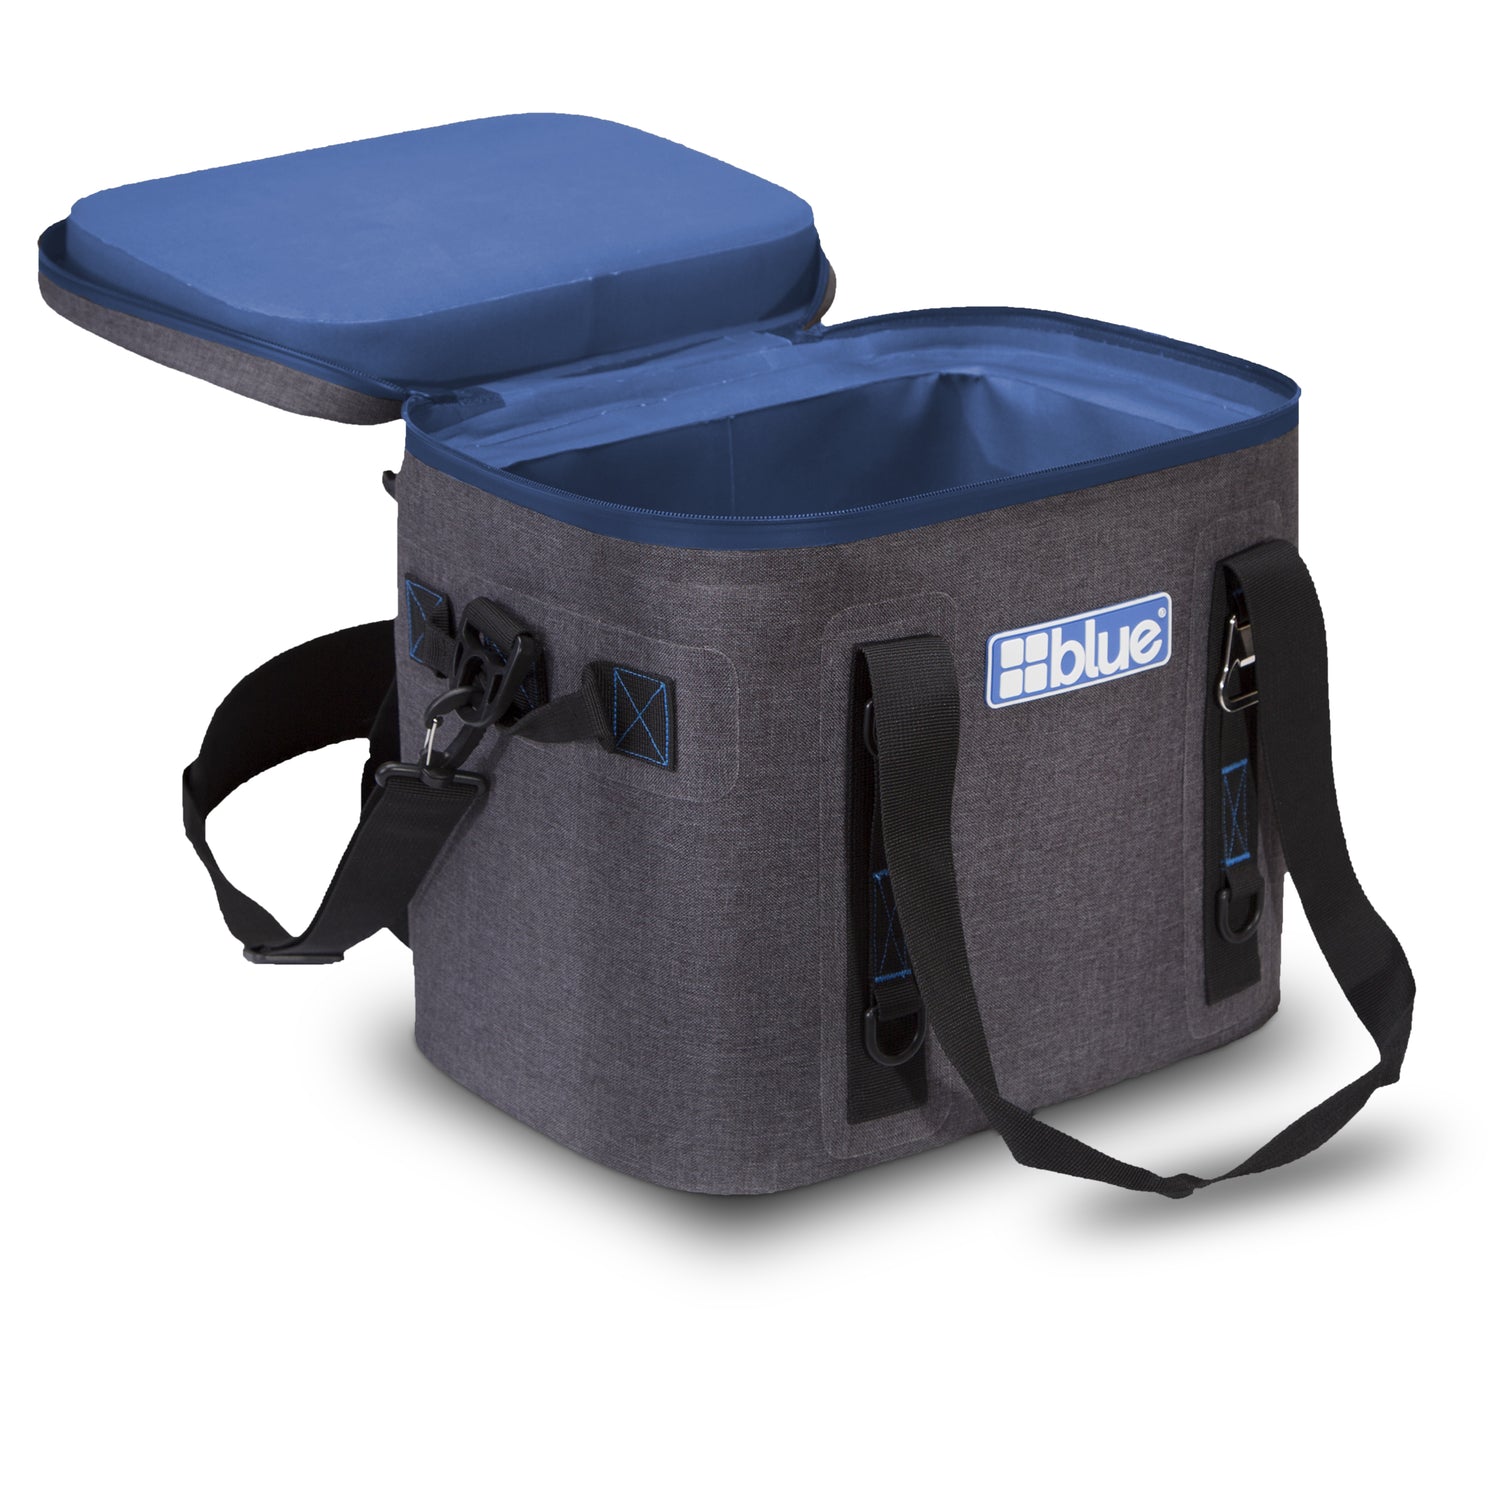 NTPC Customized - 16 Quart Soft Sided Cooler from Blue Coolers